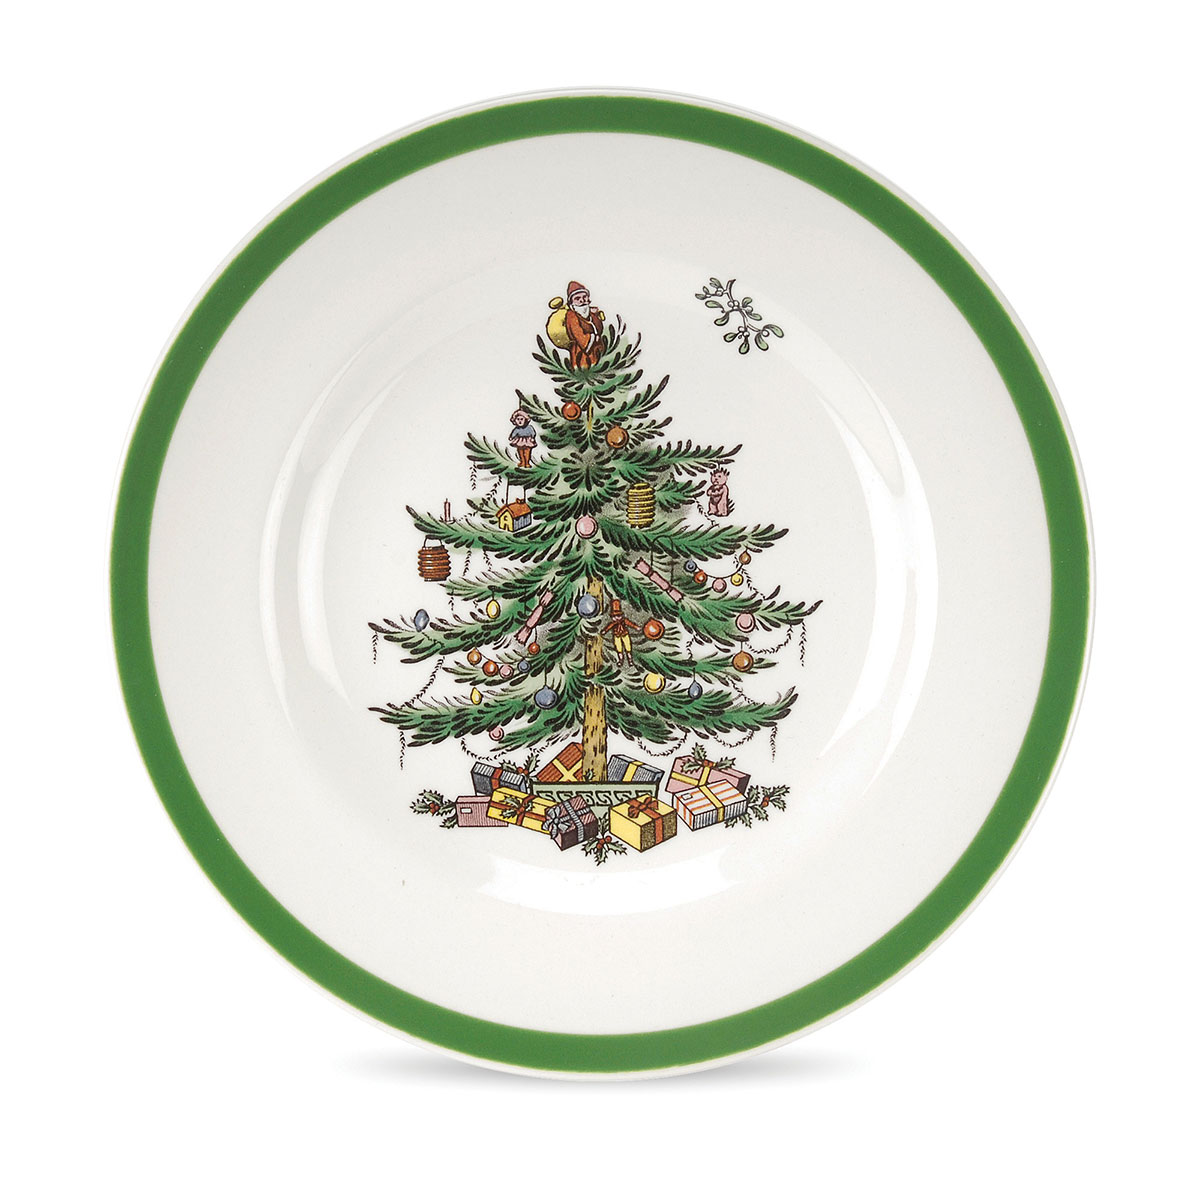 Spode Christmas Tree Bread and Butter Plate